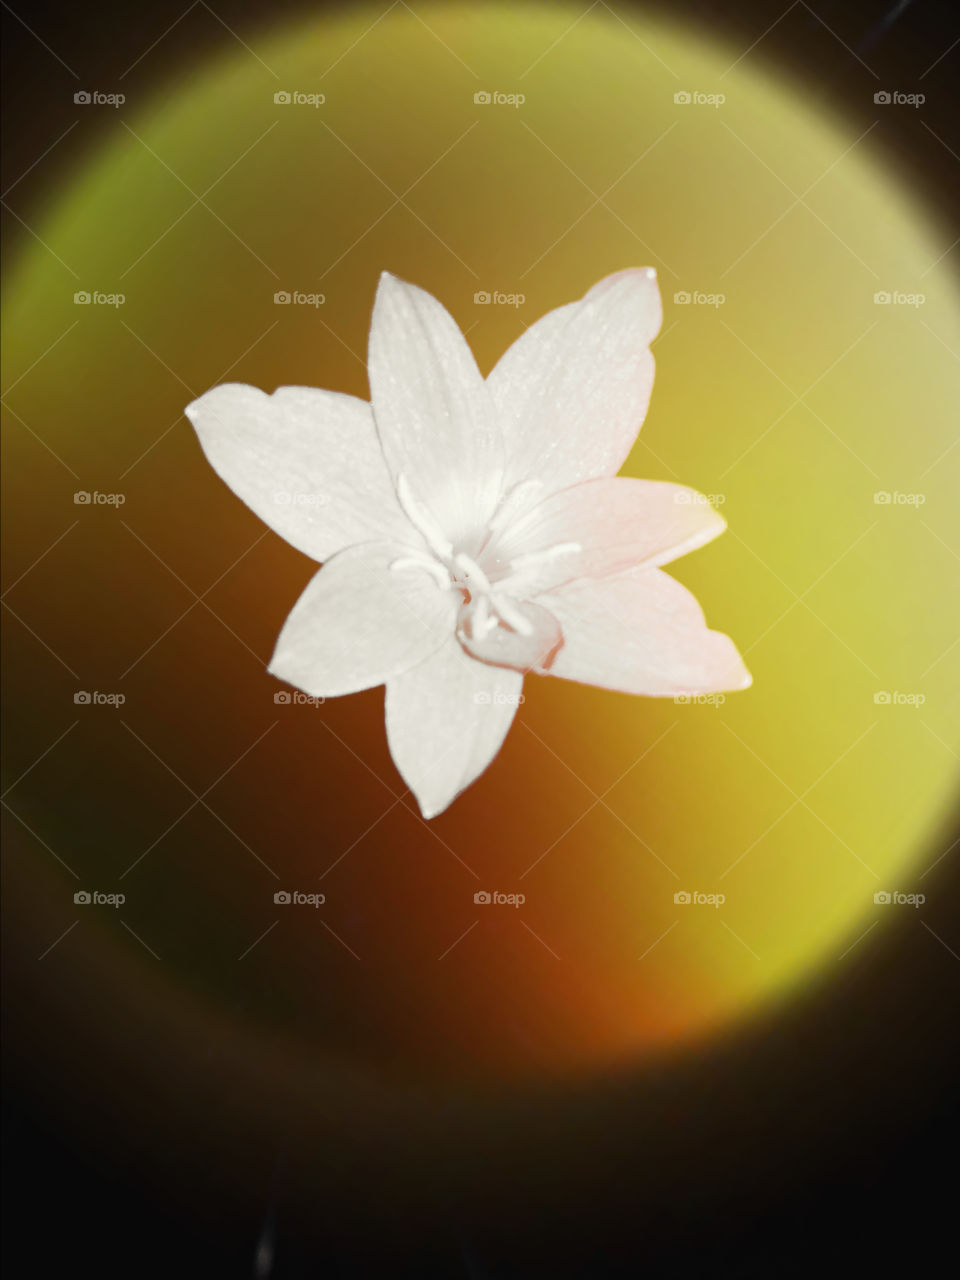 Title- Embrace your Womanhood
Description- Image of white lily flower on black background.